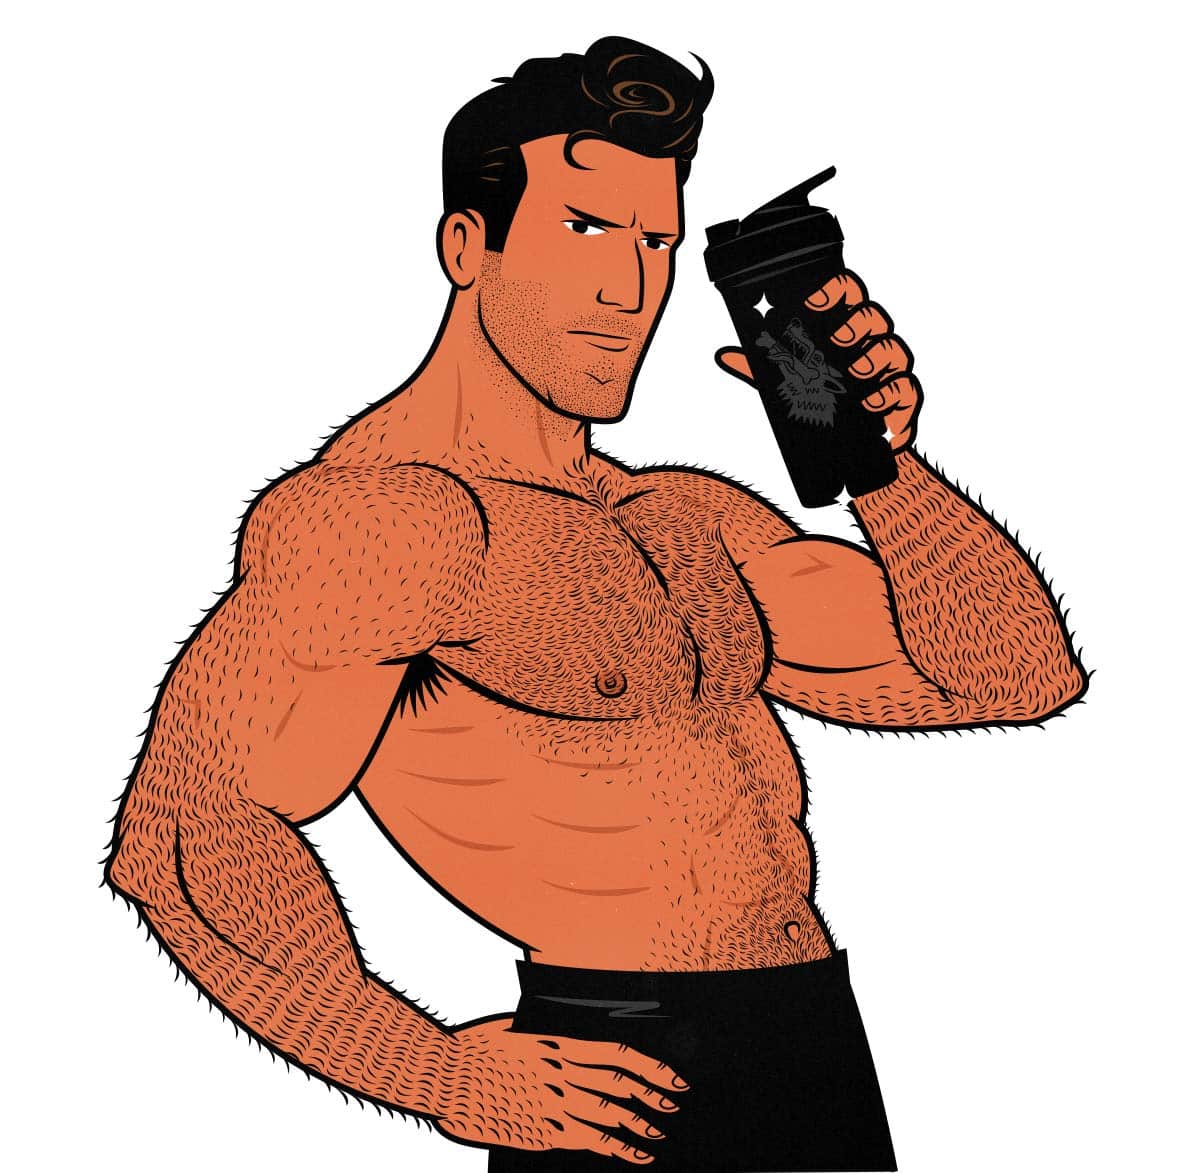 Illustration of a bodybuilder drinking whey protein shakes to build muscle and bulk up.